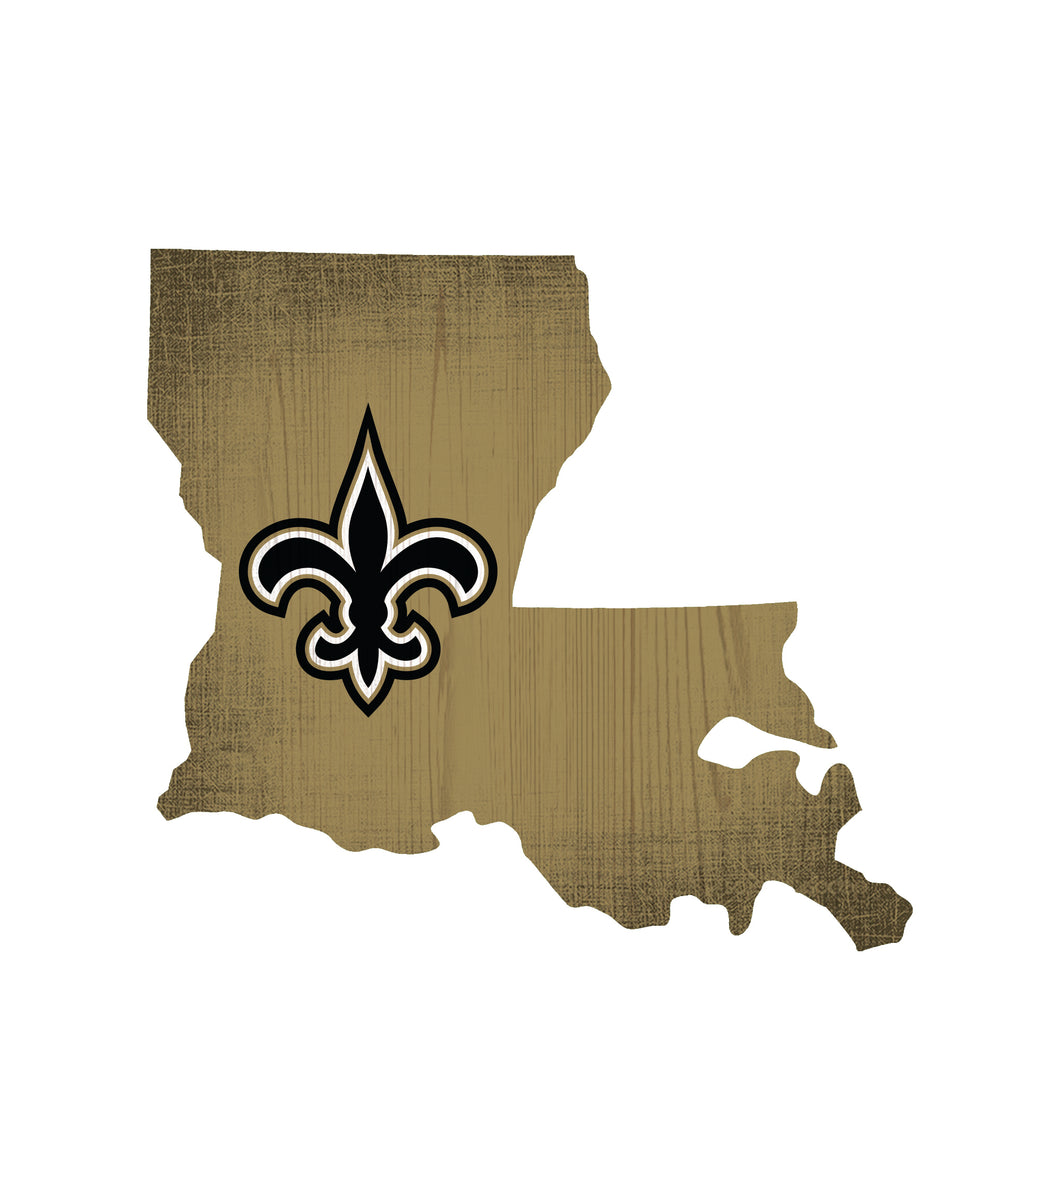 New Orleans Saints State Wood Sign